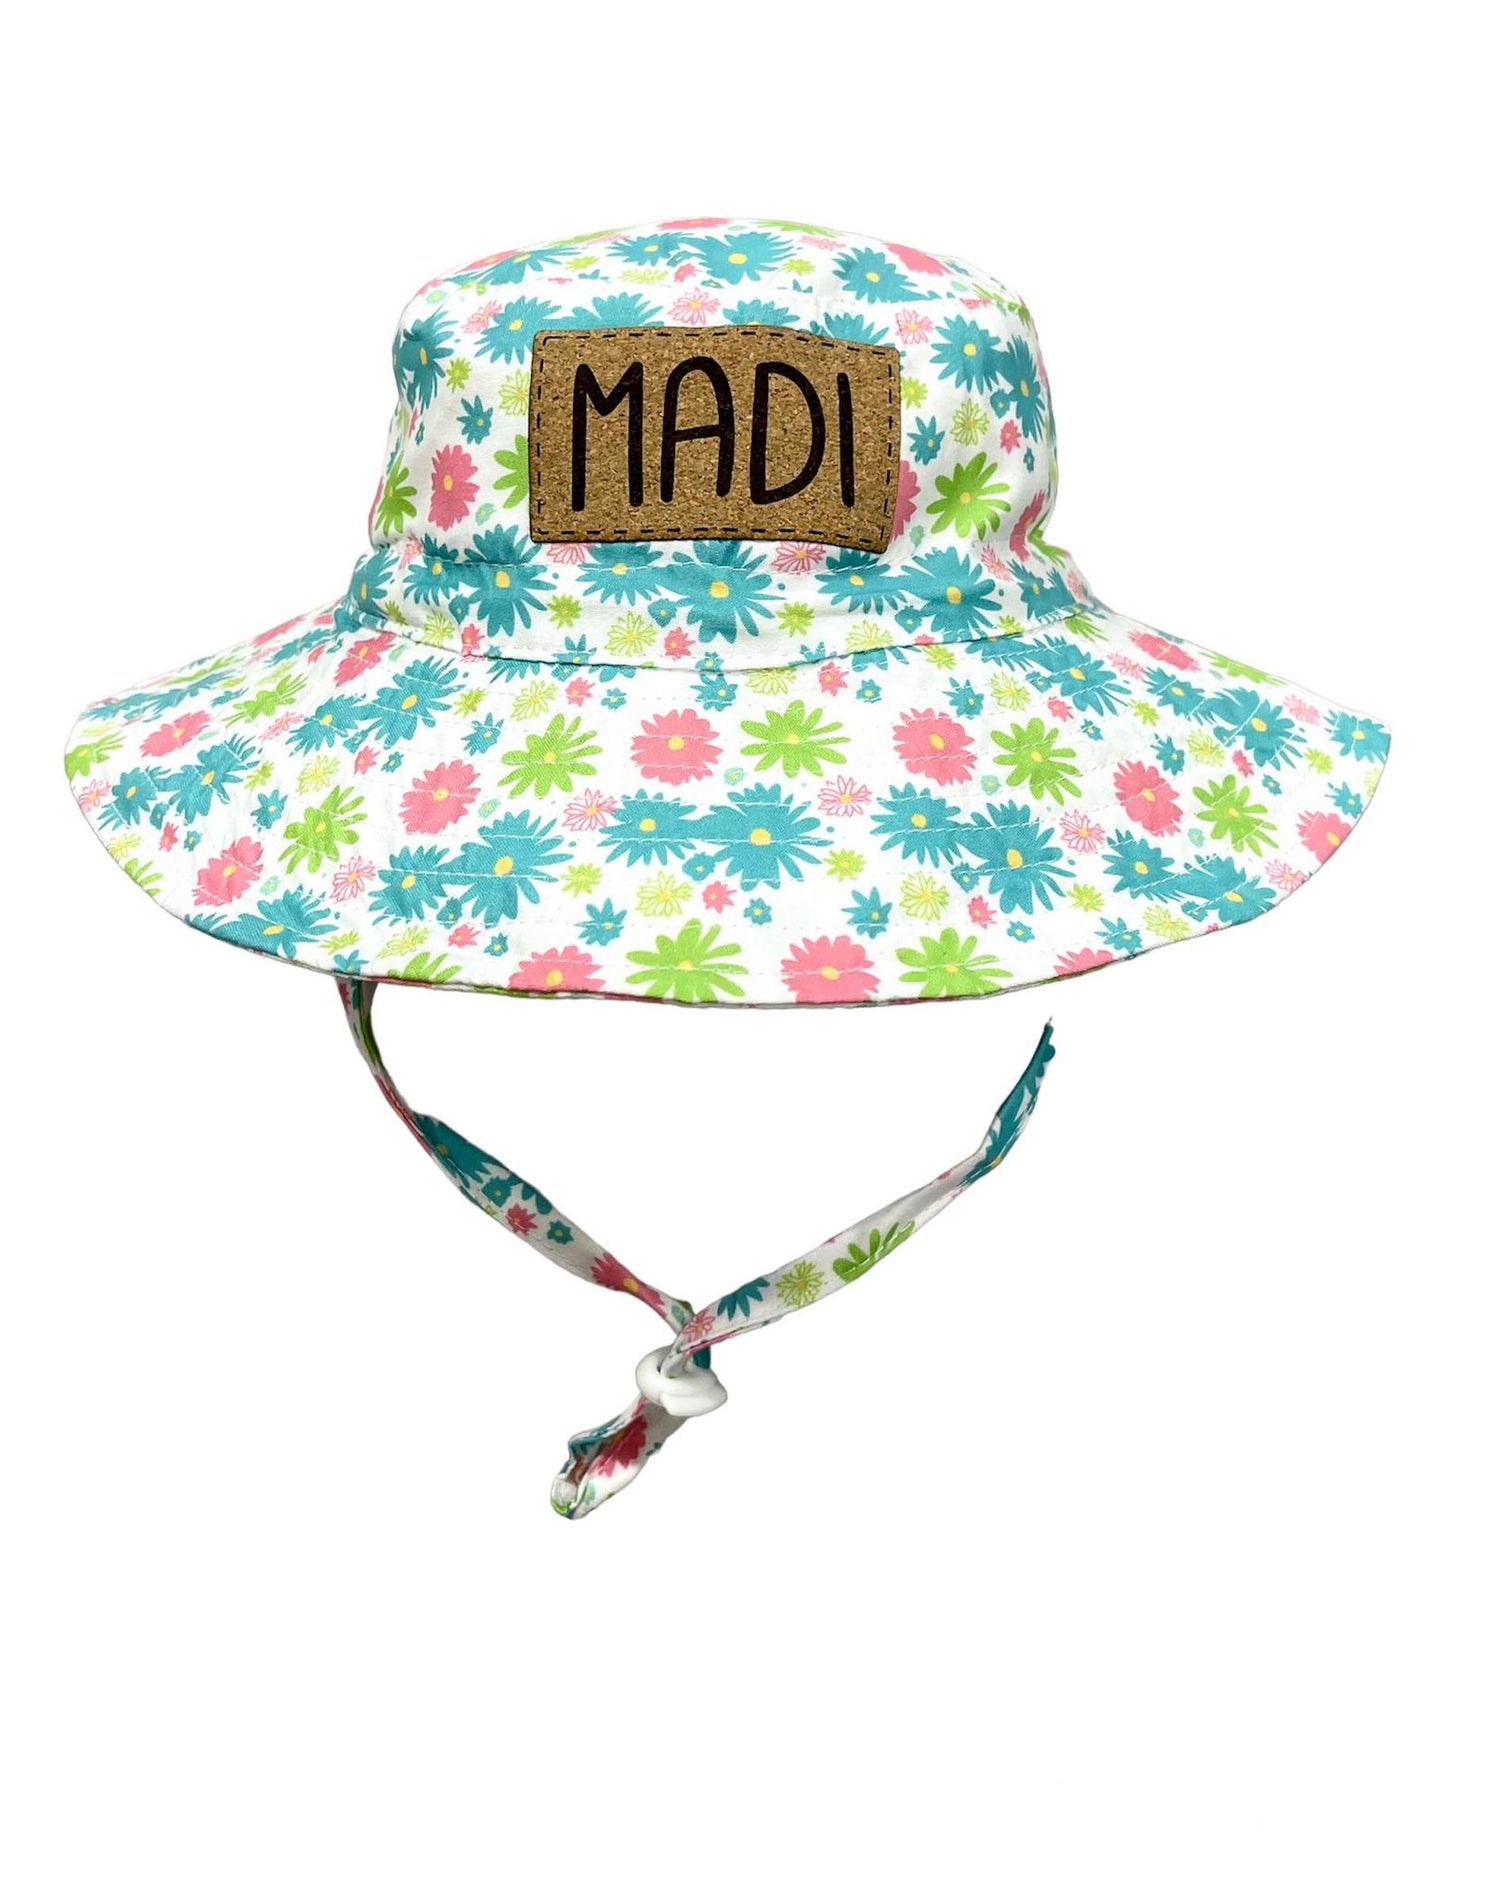 Baby, Toddler, Kids Size Adjustable Bucket Hats, Boys and Girls Person –  Wild About Me